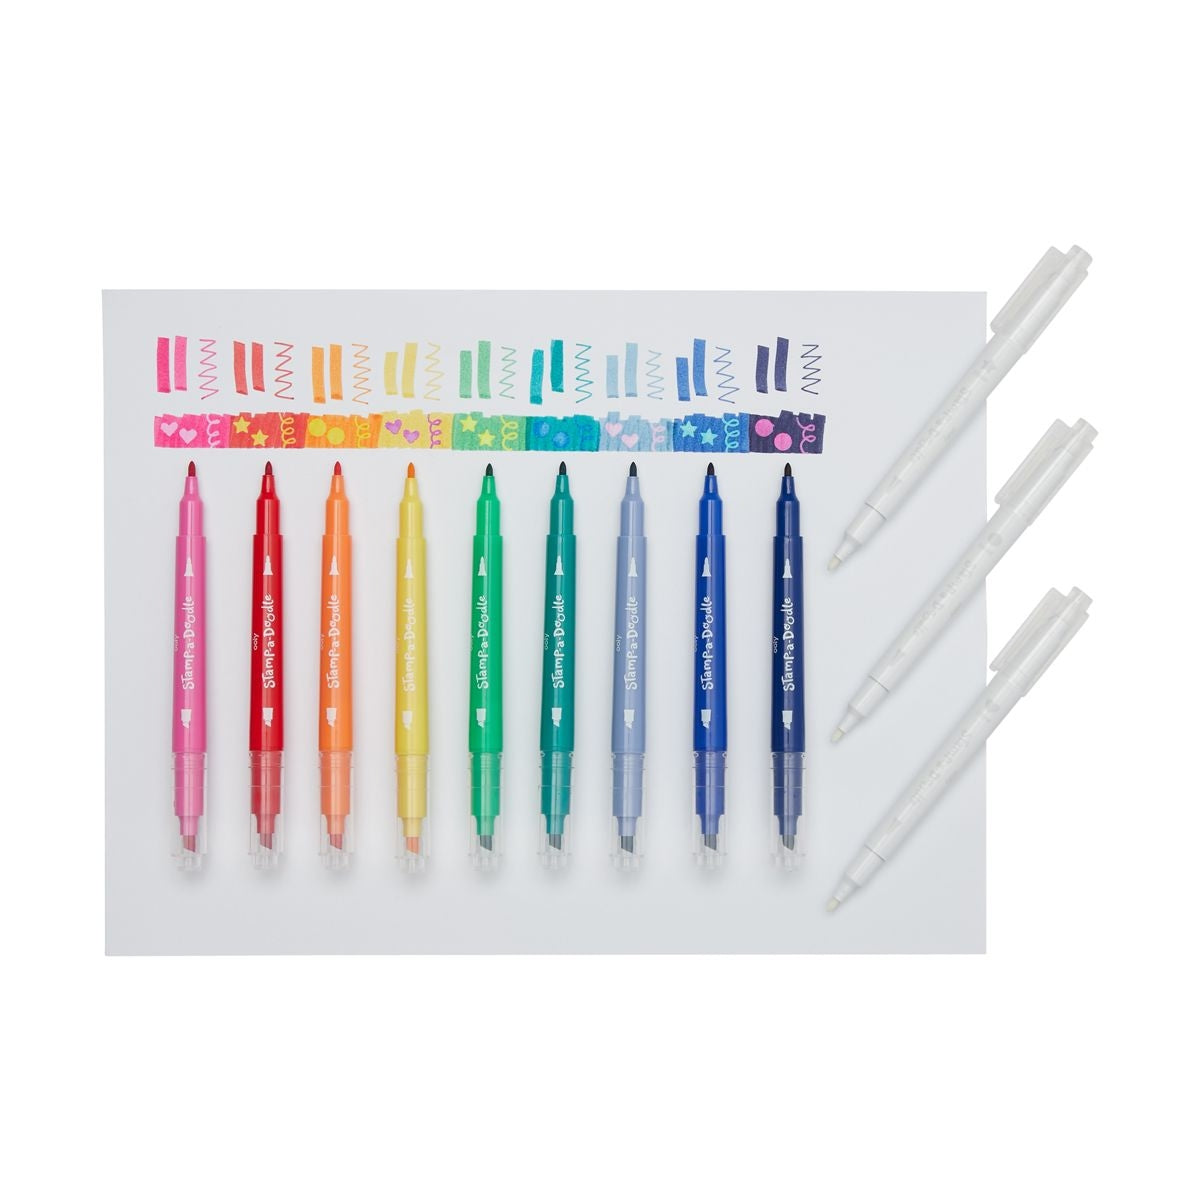 Stamp-A-Doodle Double-Ended Markers | Set of 12